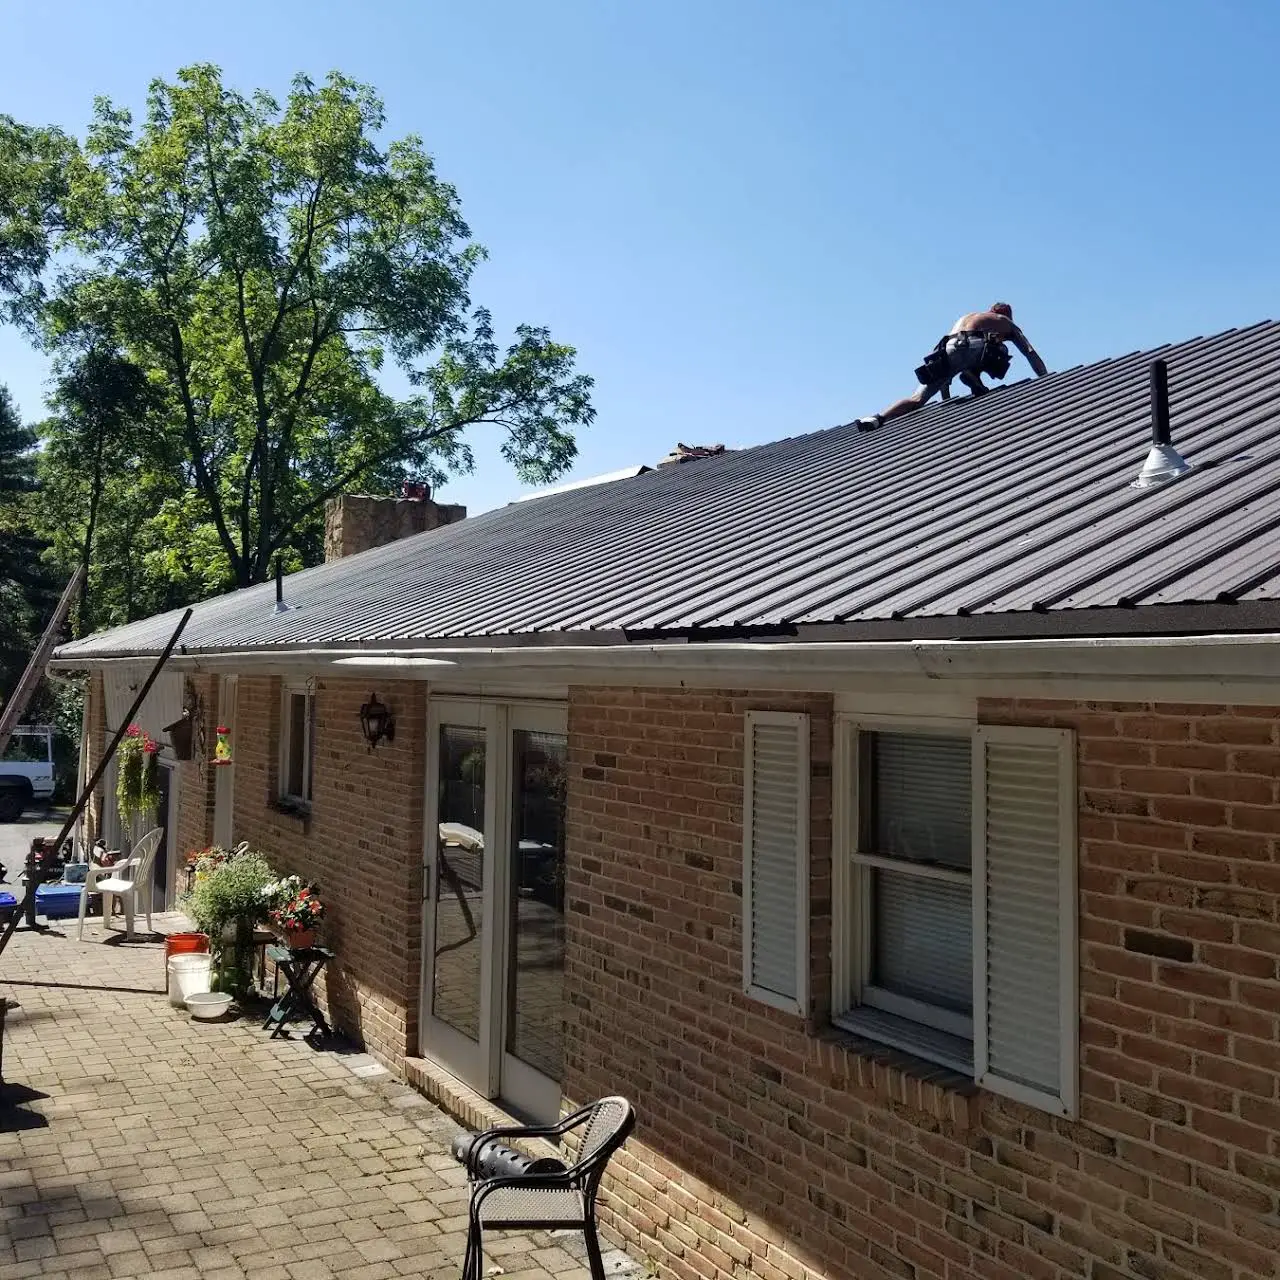 R &  R Roofing/Rubber/Metal/Shingle Roofing